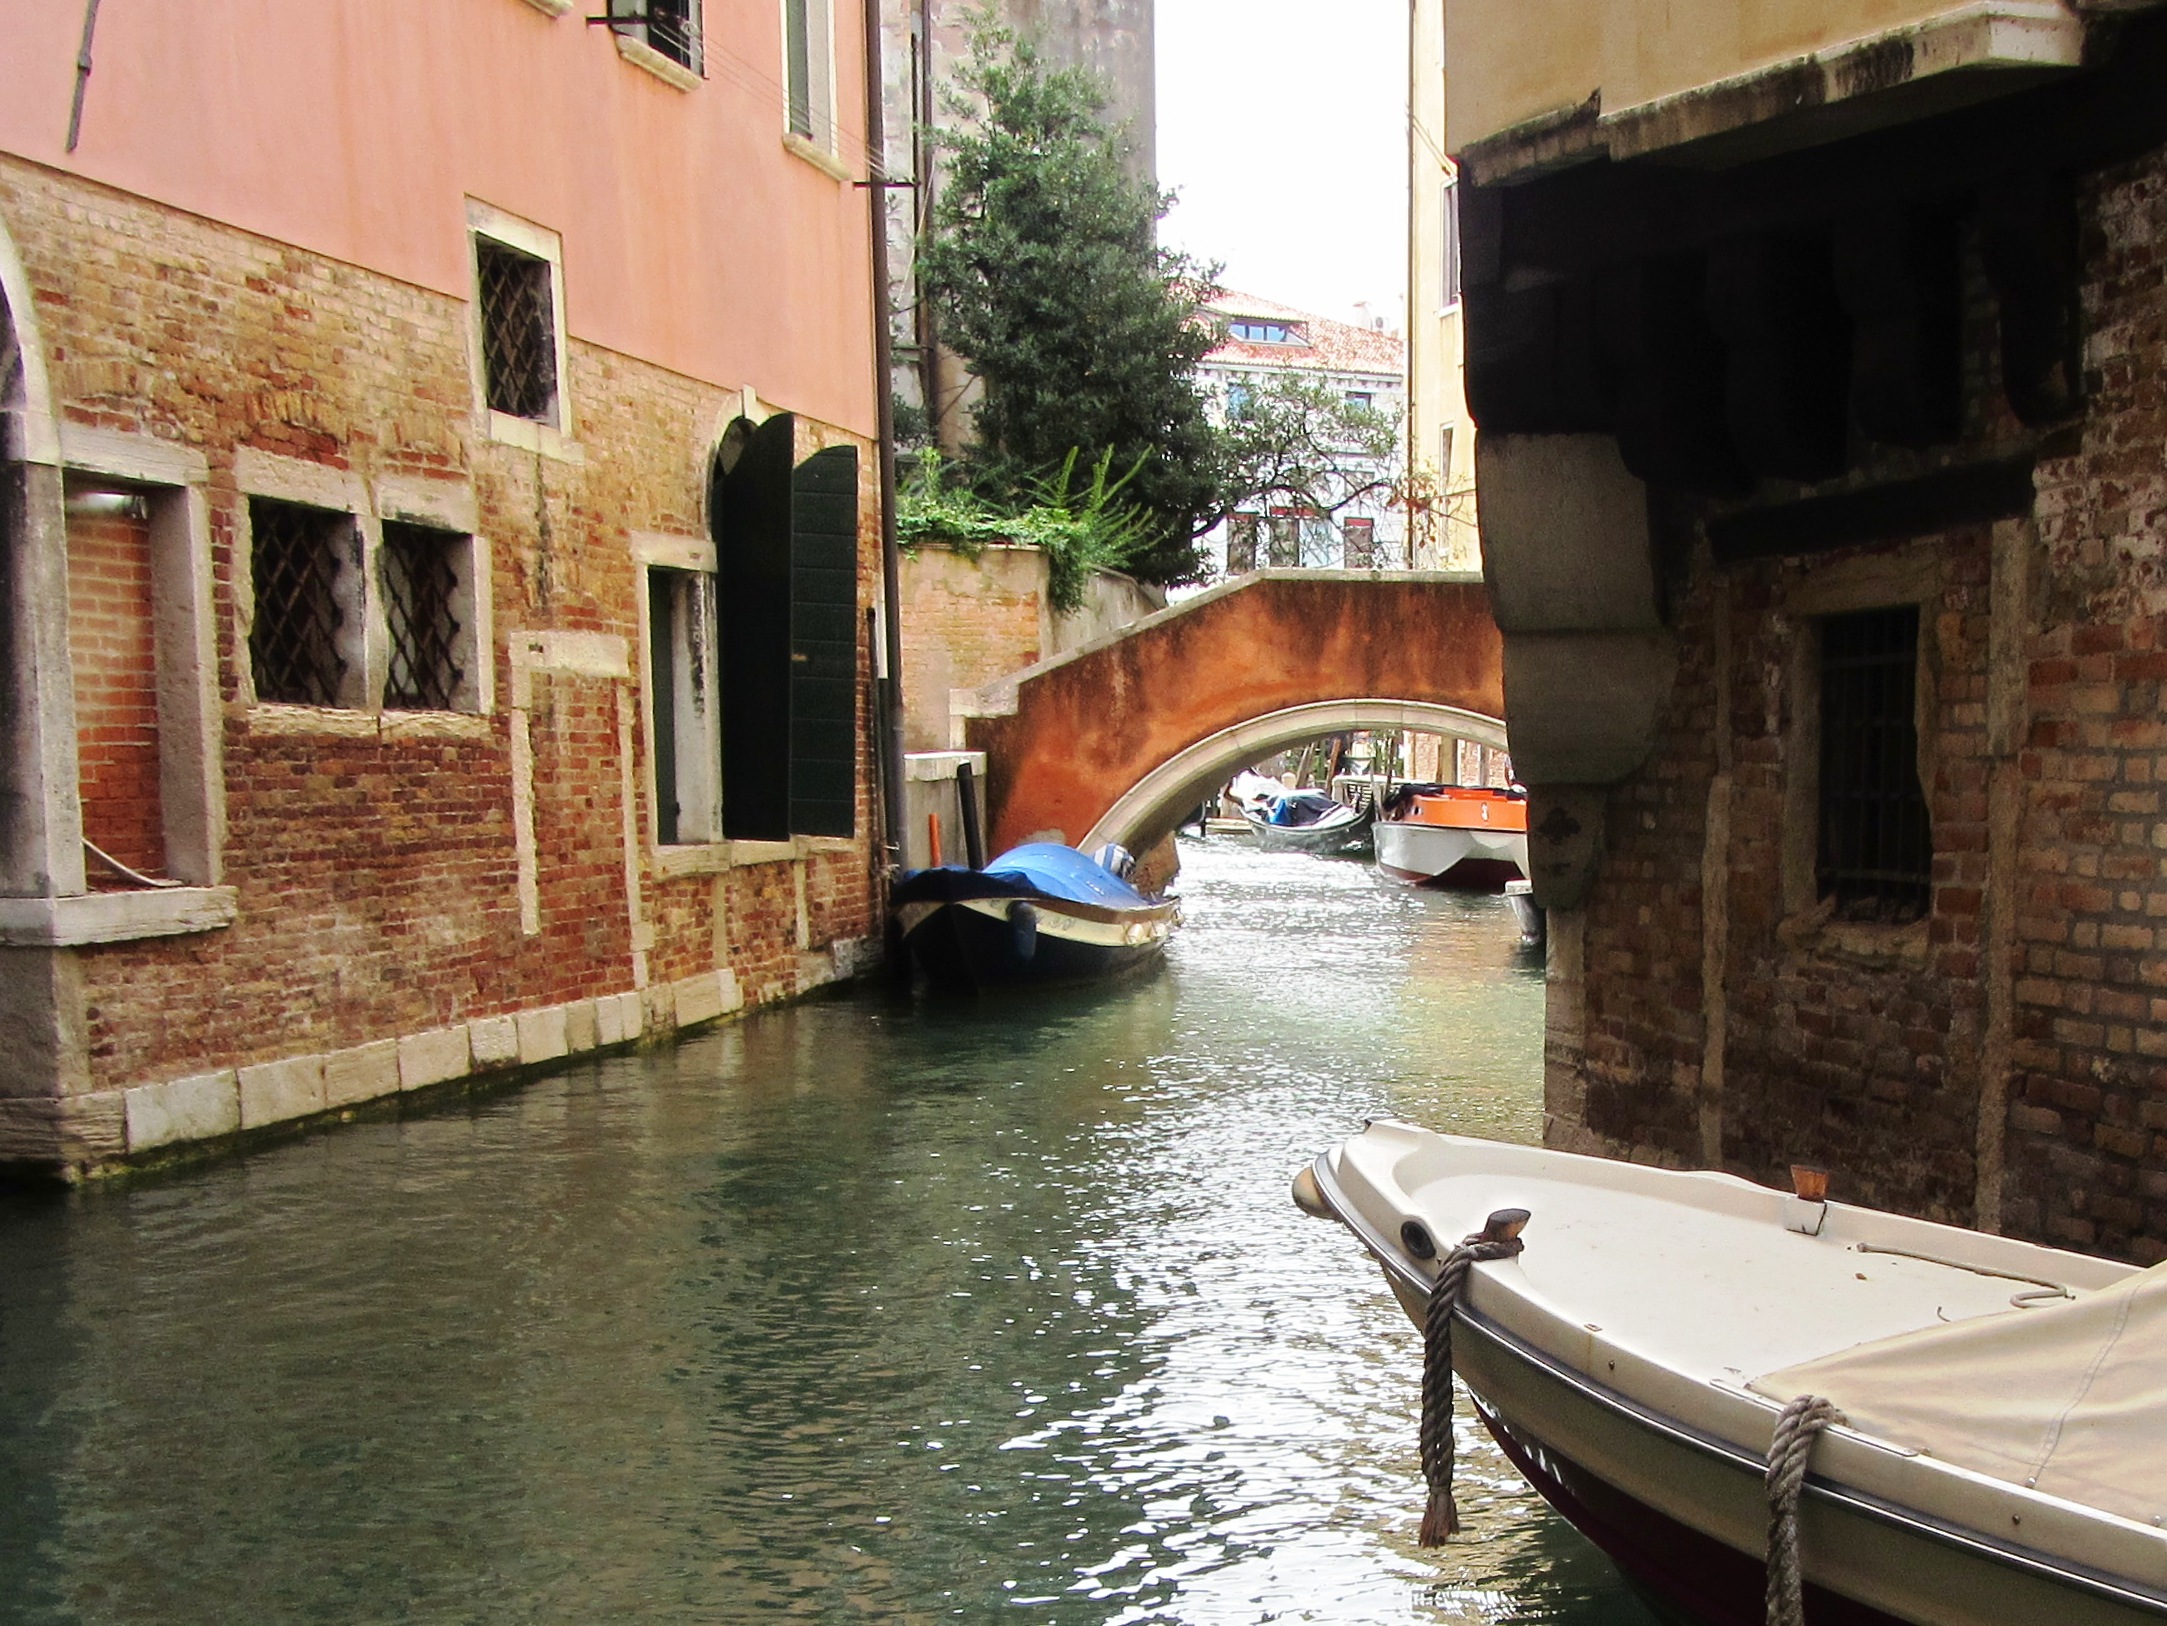 Photo of a Venician canal